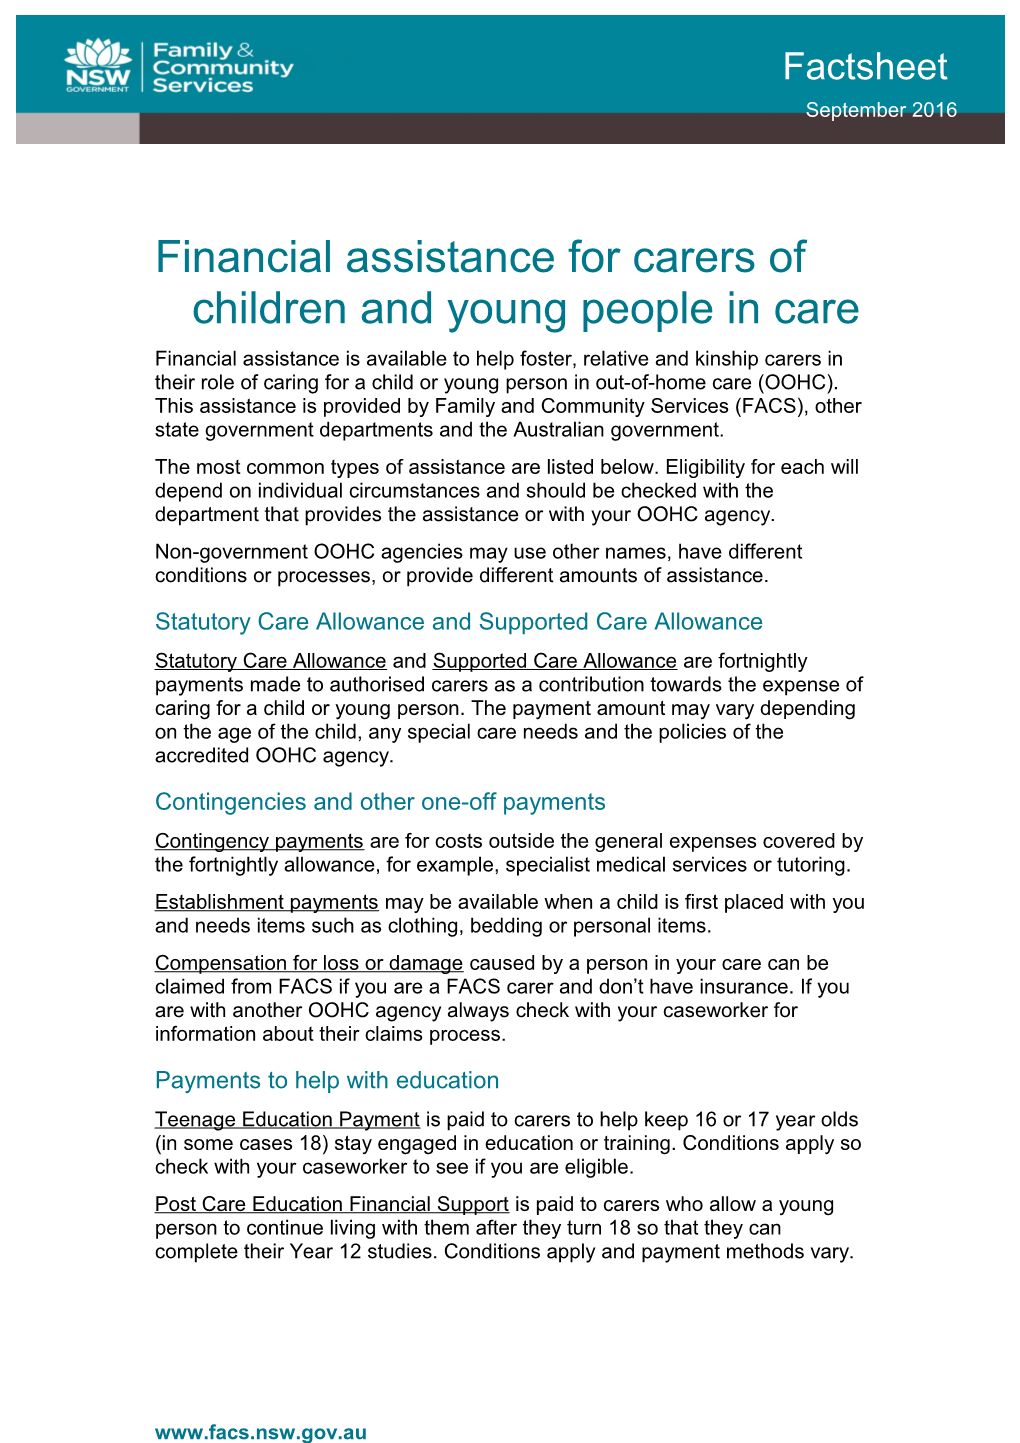 Financial Assistance for Carers of Children and Young People in Care